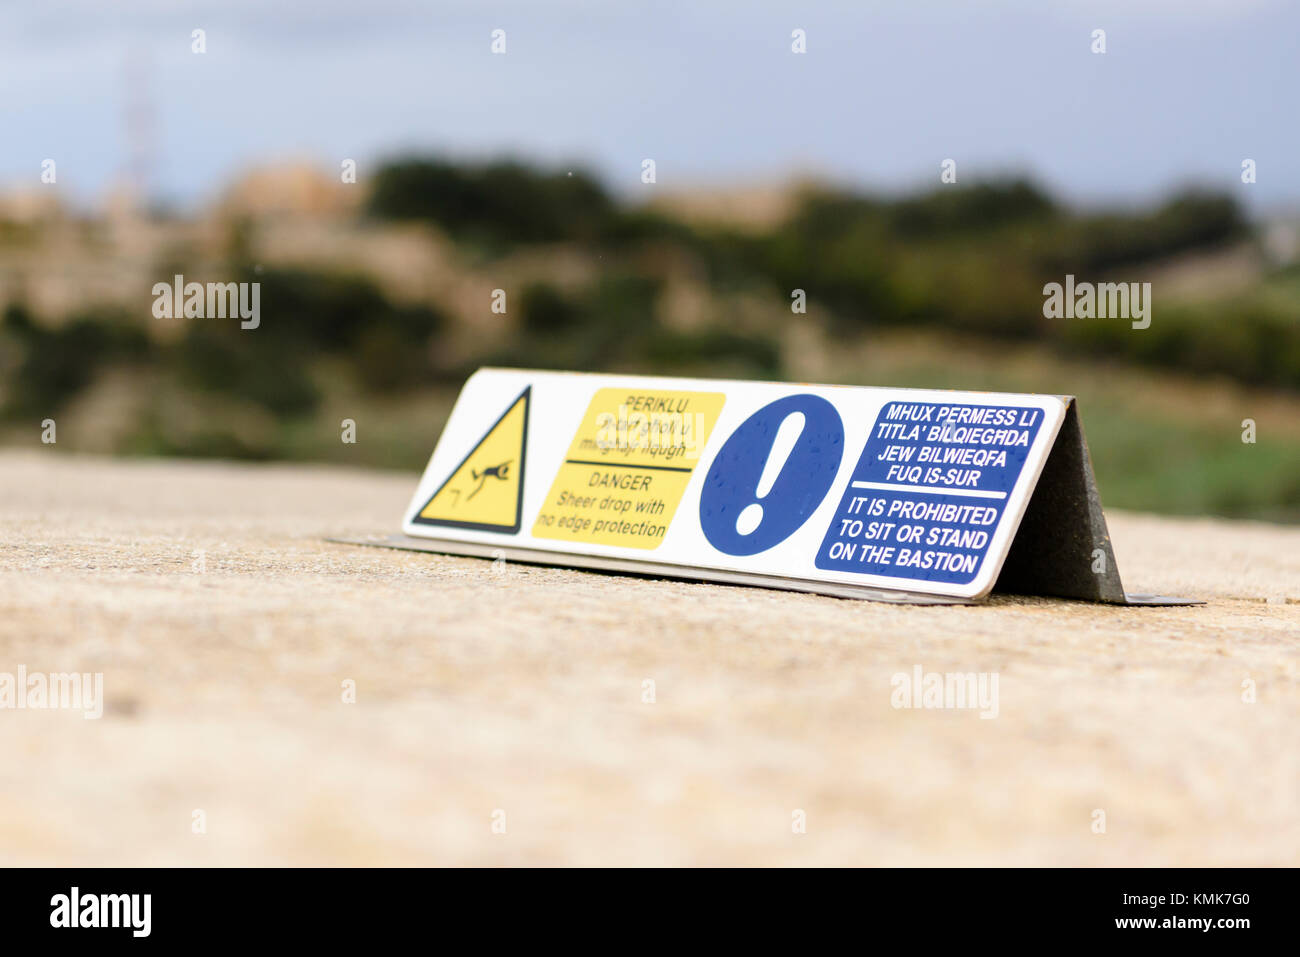 Sign warning visitors not to sit or stand on the bastion ramparts of Mdina Walled City, due to the sheer drop on the other side. Stock Photo